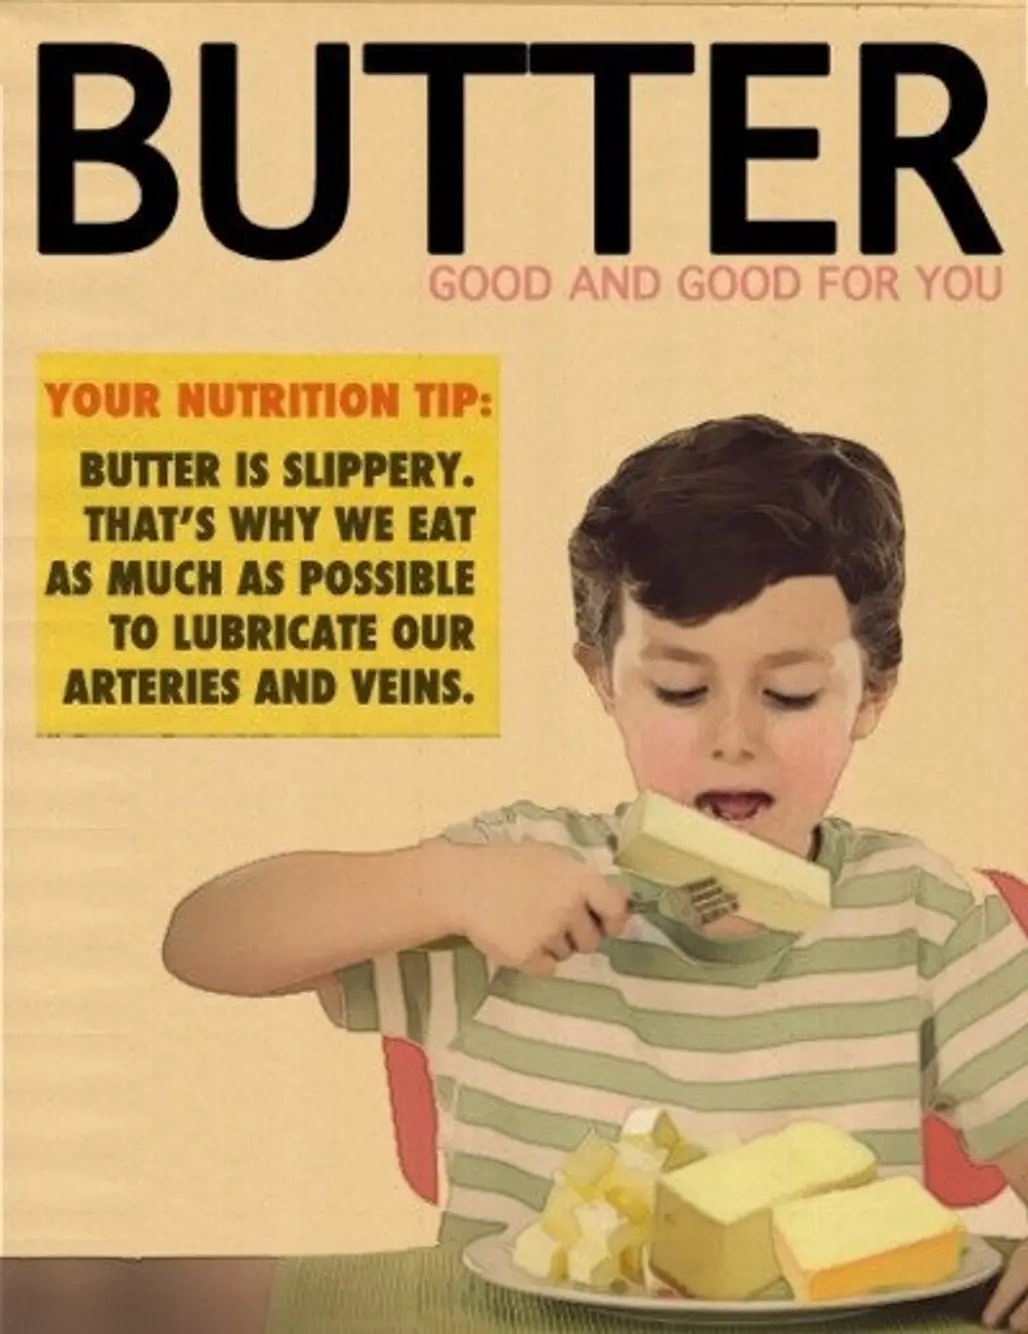 Butter in the Old Days